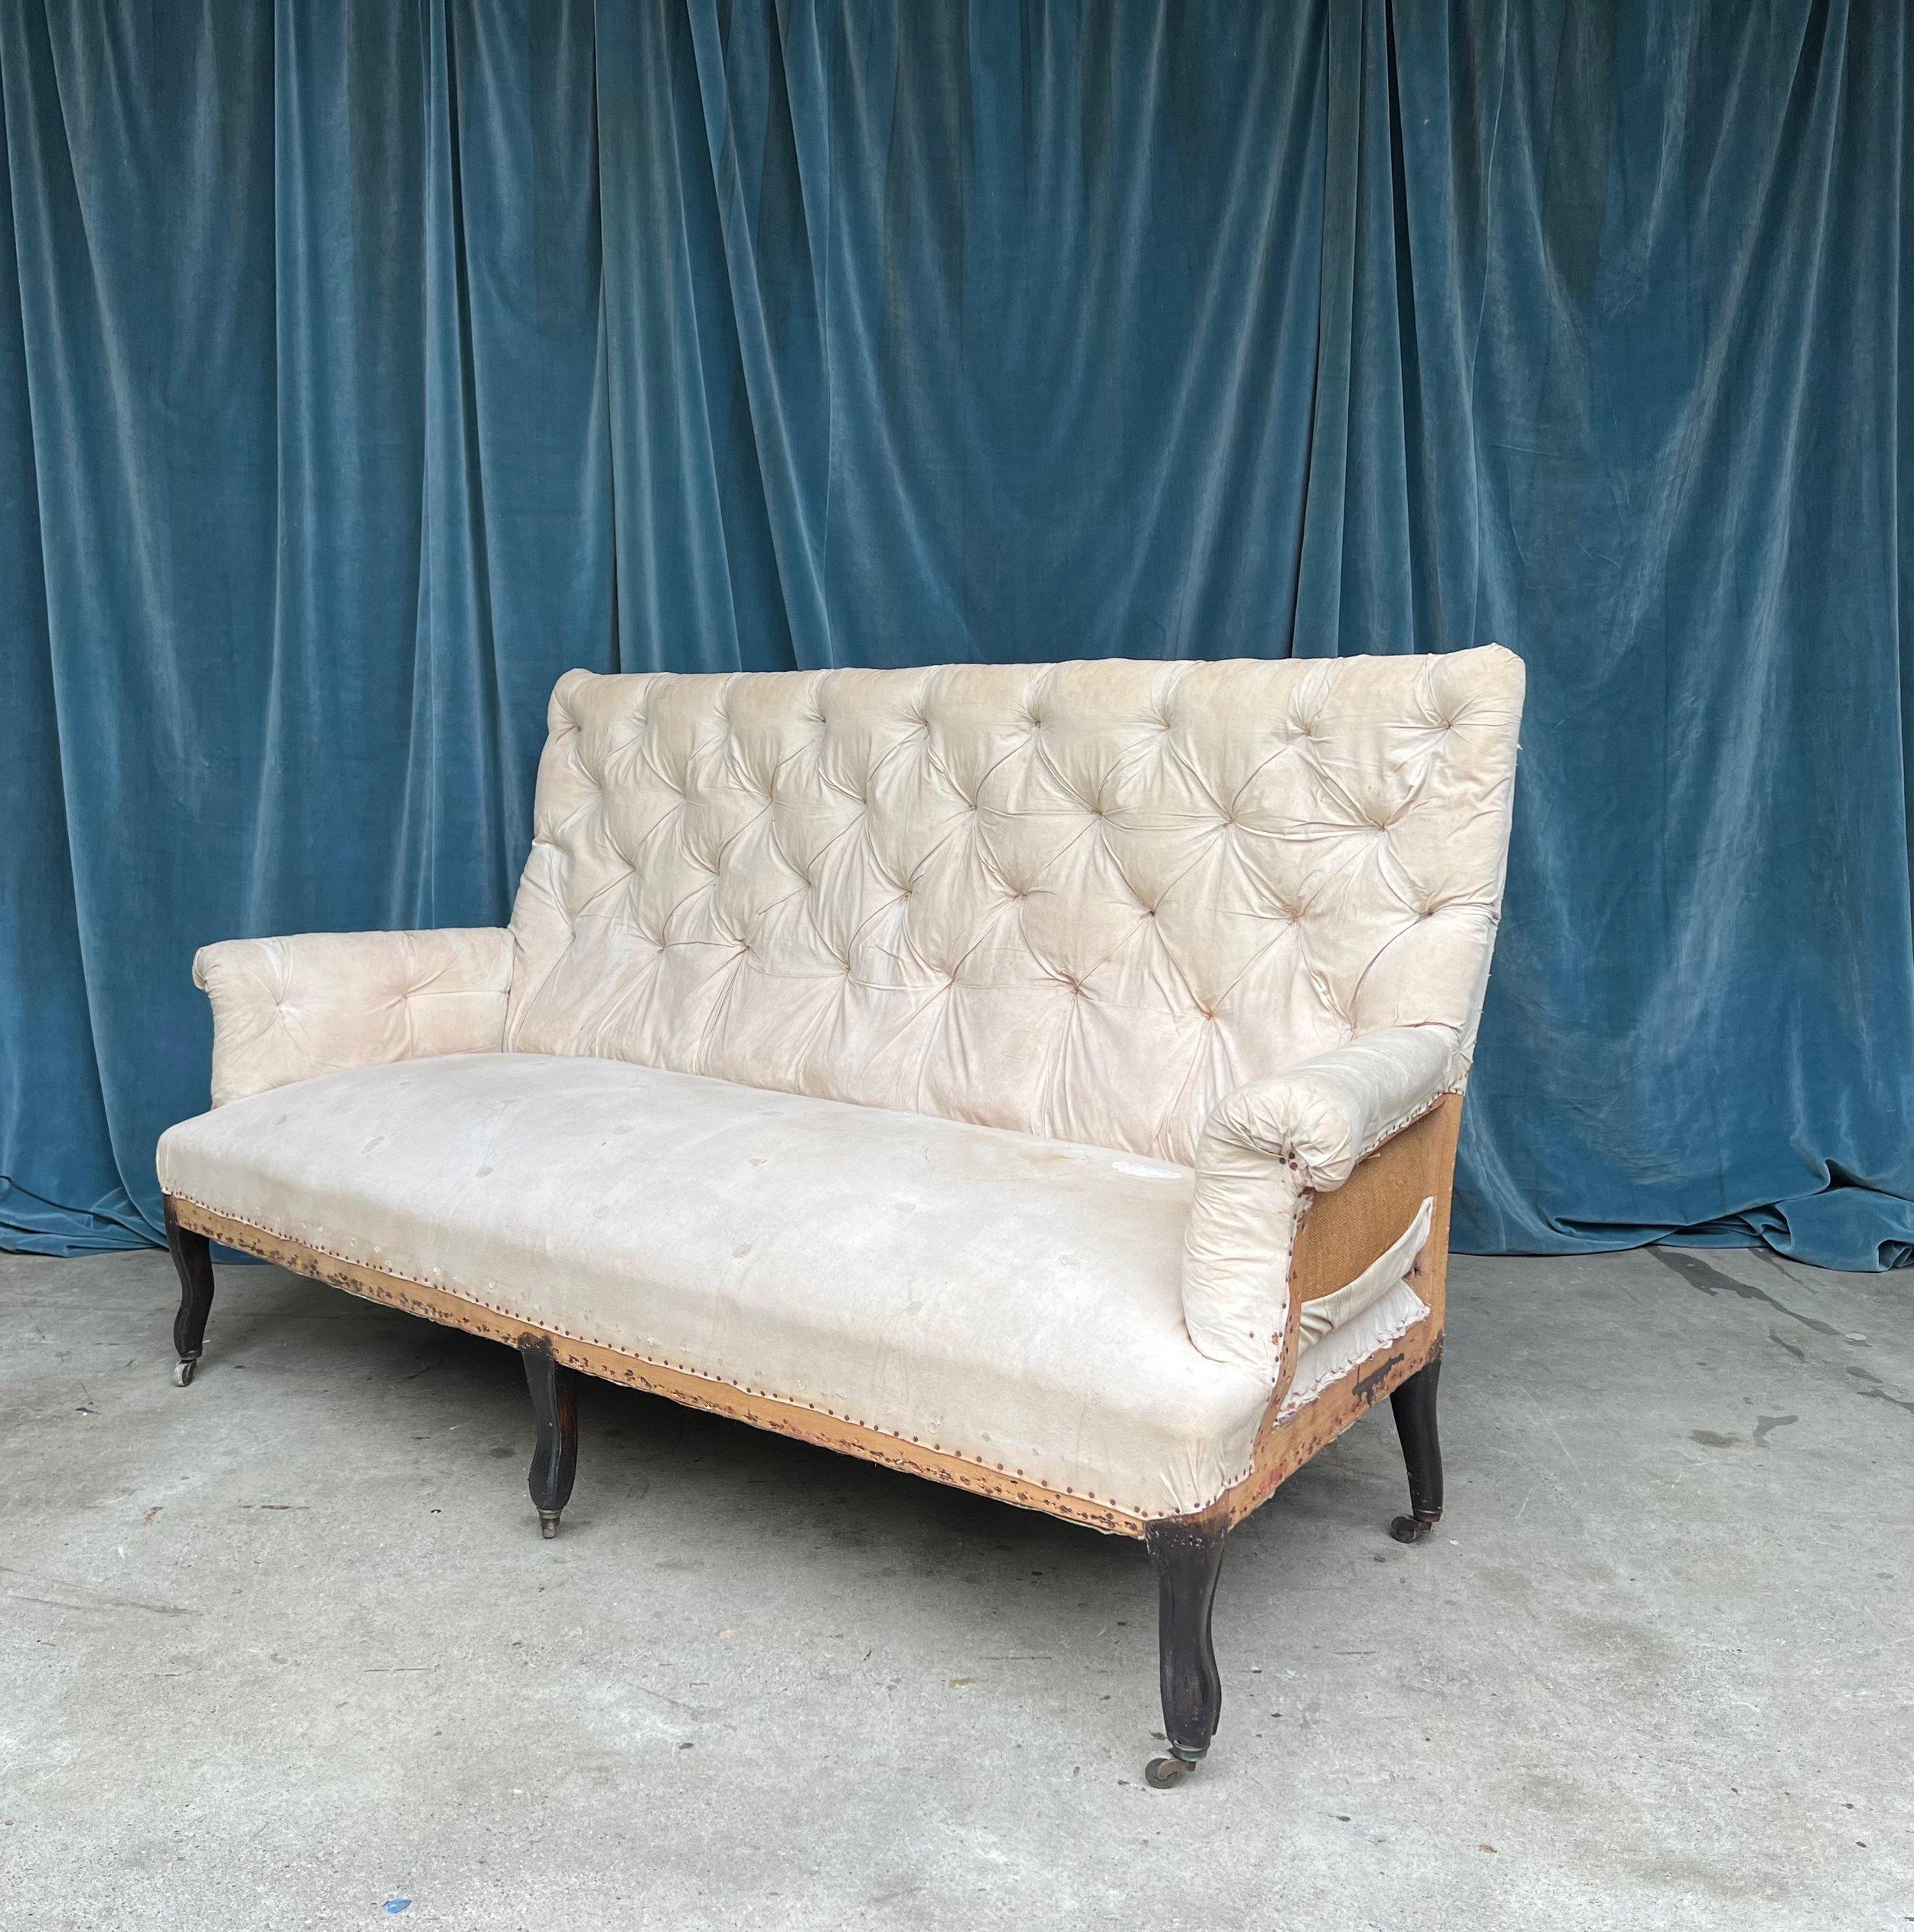 A large scale French 19th century Napoleon III high backed sofa with cabriole legs. The back of this sofa is heavily tufted as are the rolled arms - adding grandeur and sophistication to its design. The sofa has been stripped down to the muslin and